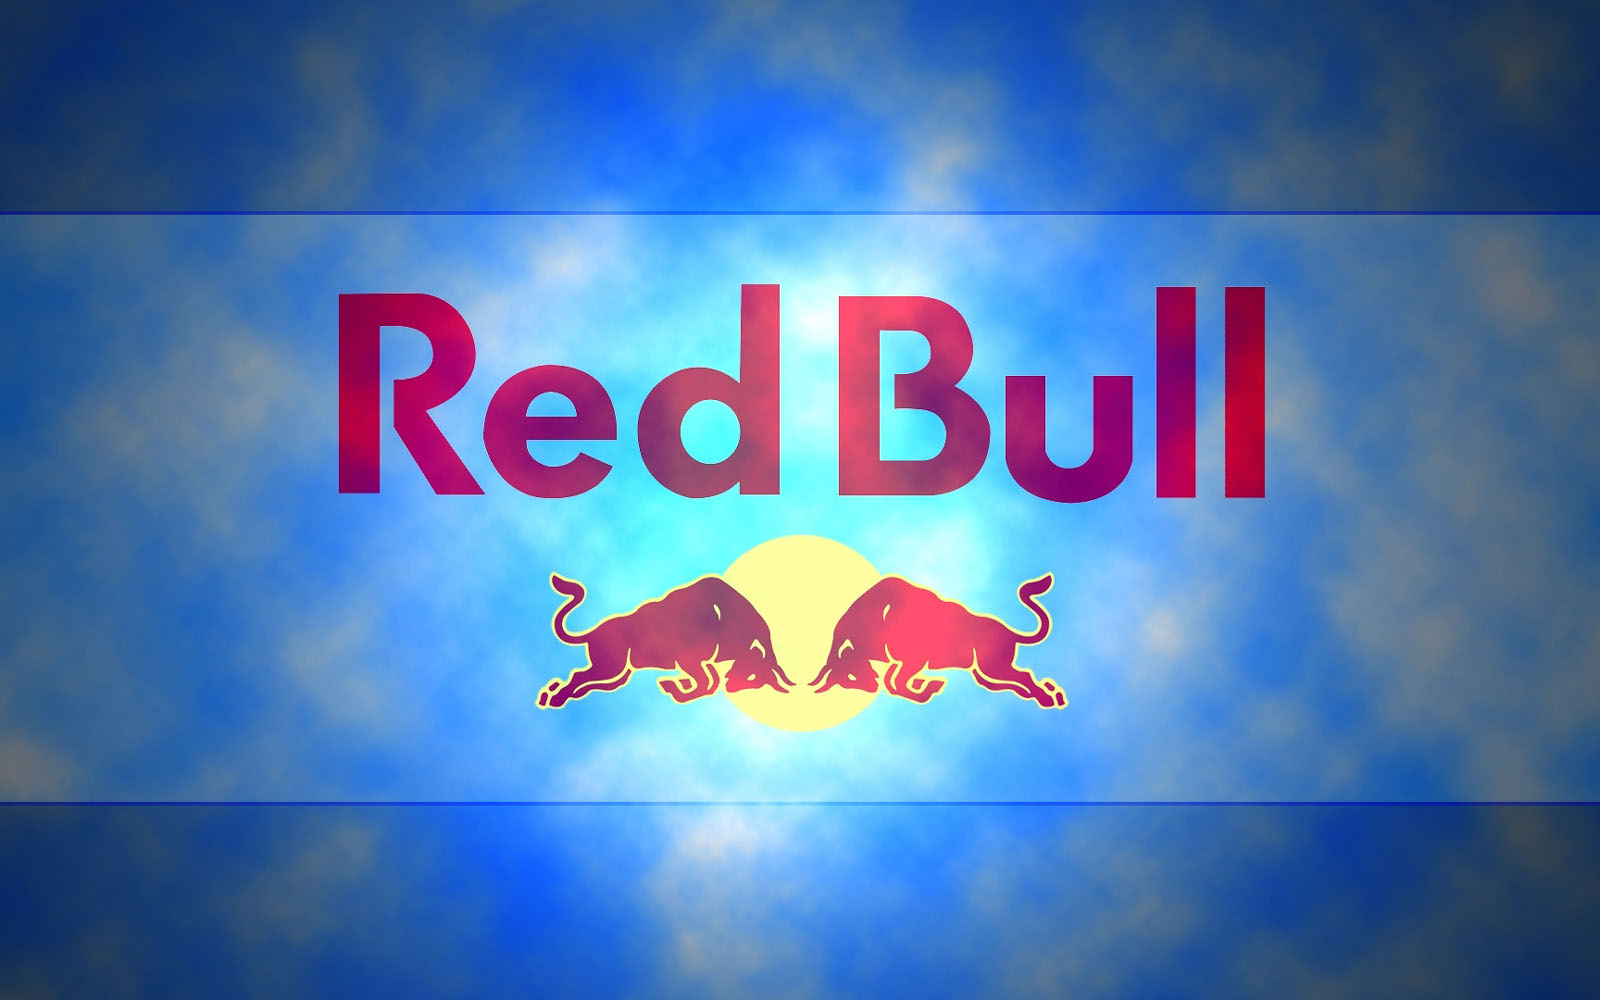 Tag Red Bull Wallpaper Background Photos Image And Pictures For